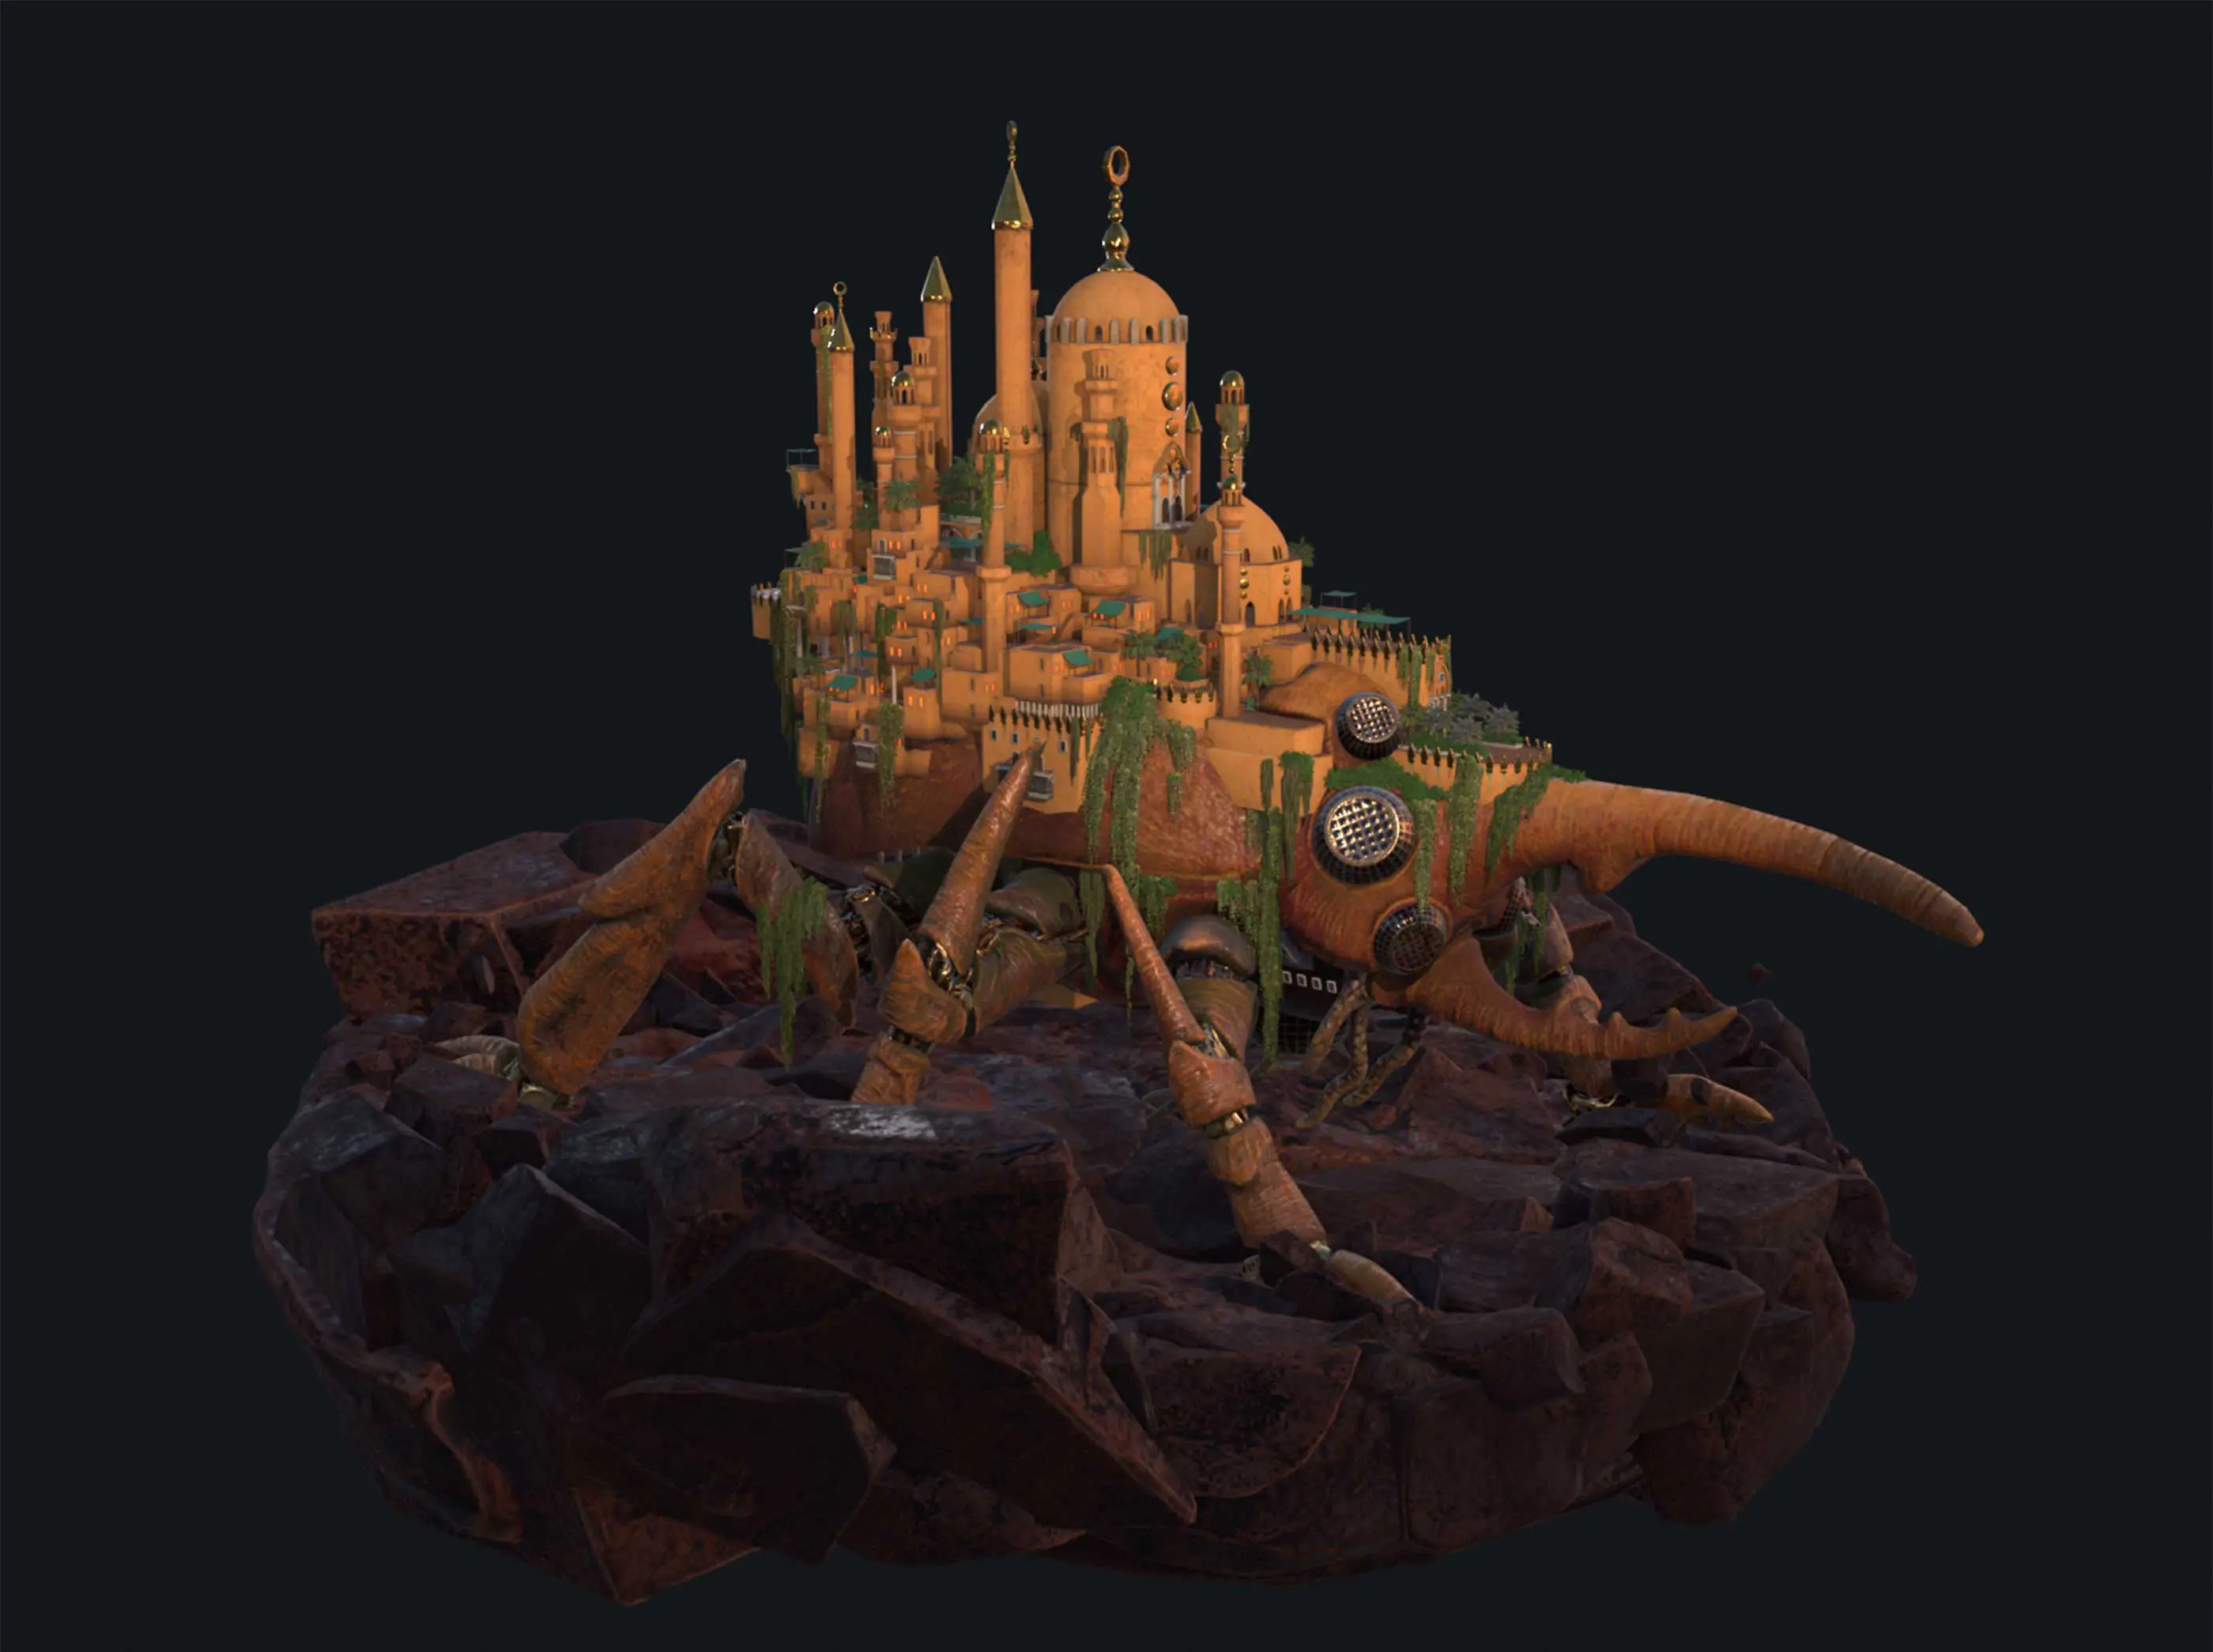 A 3D render of a city atop a large beetle-like construction.